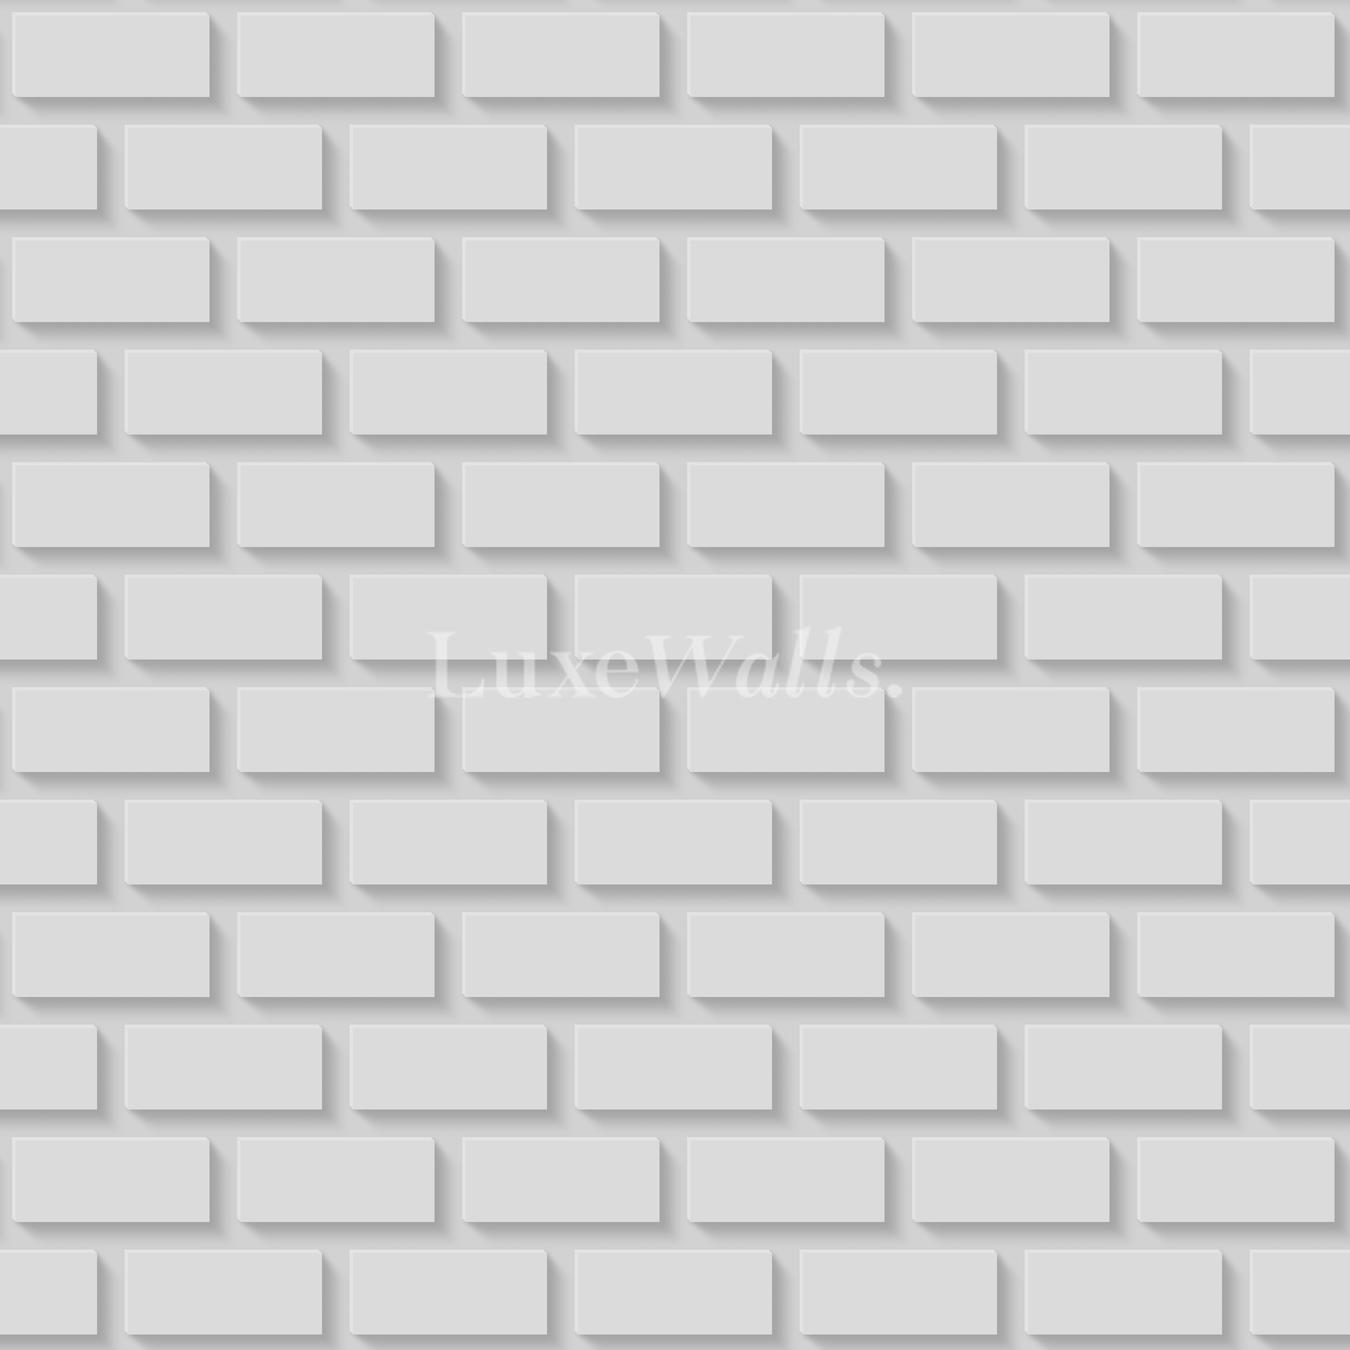 Buy Exposed Brick Wallpaper Available Online. Enquire Now